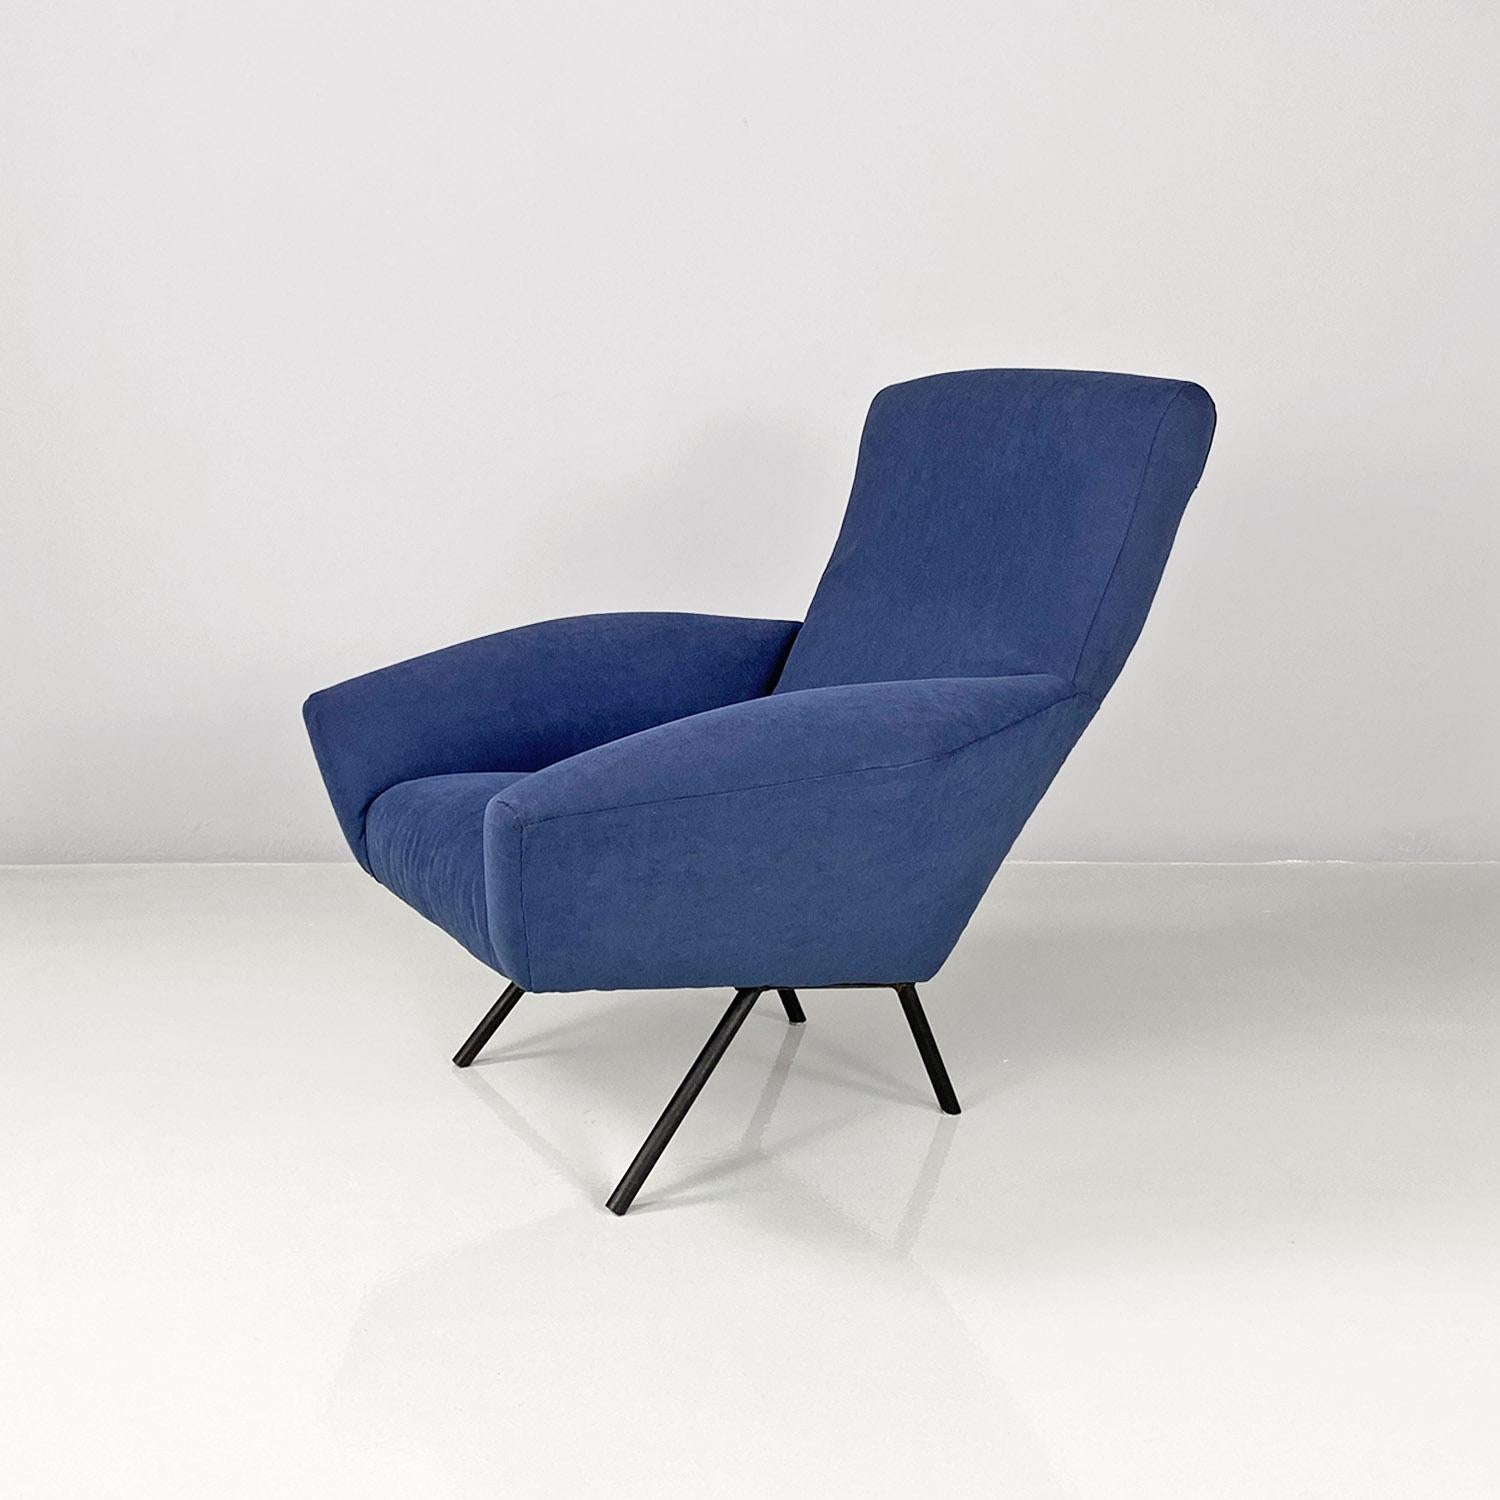 Italian mid-century modern blue fabric and black metal armchairs, 1960s For Sale 1